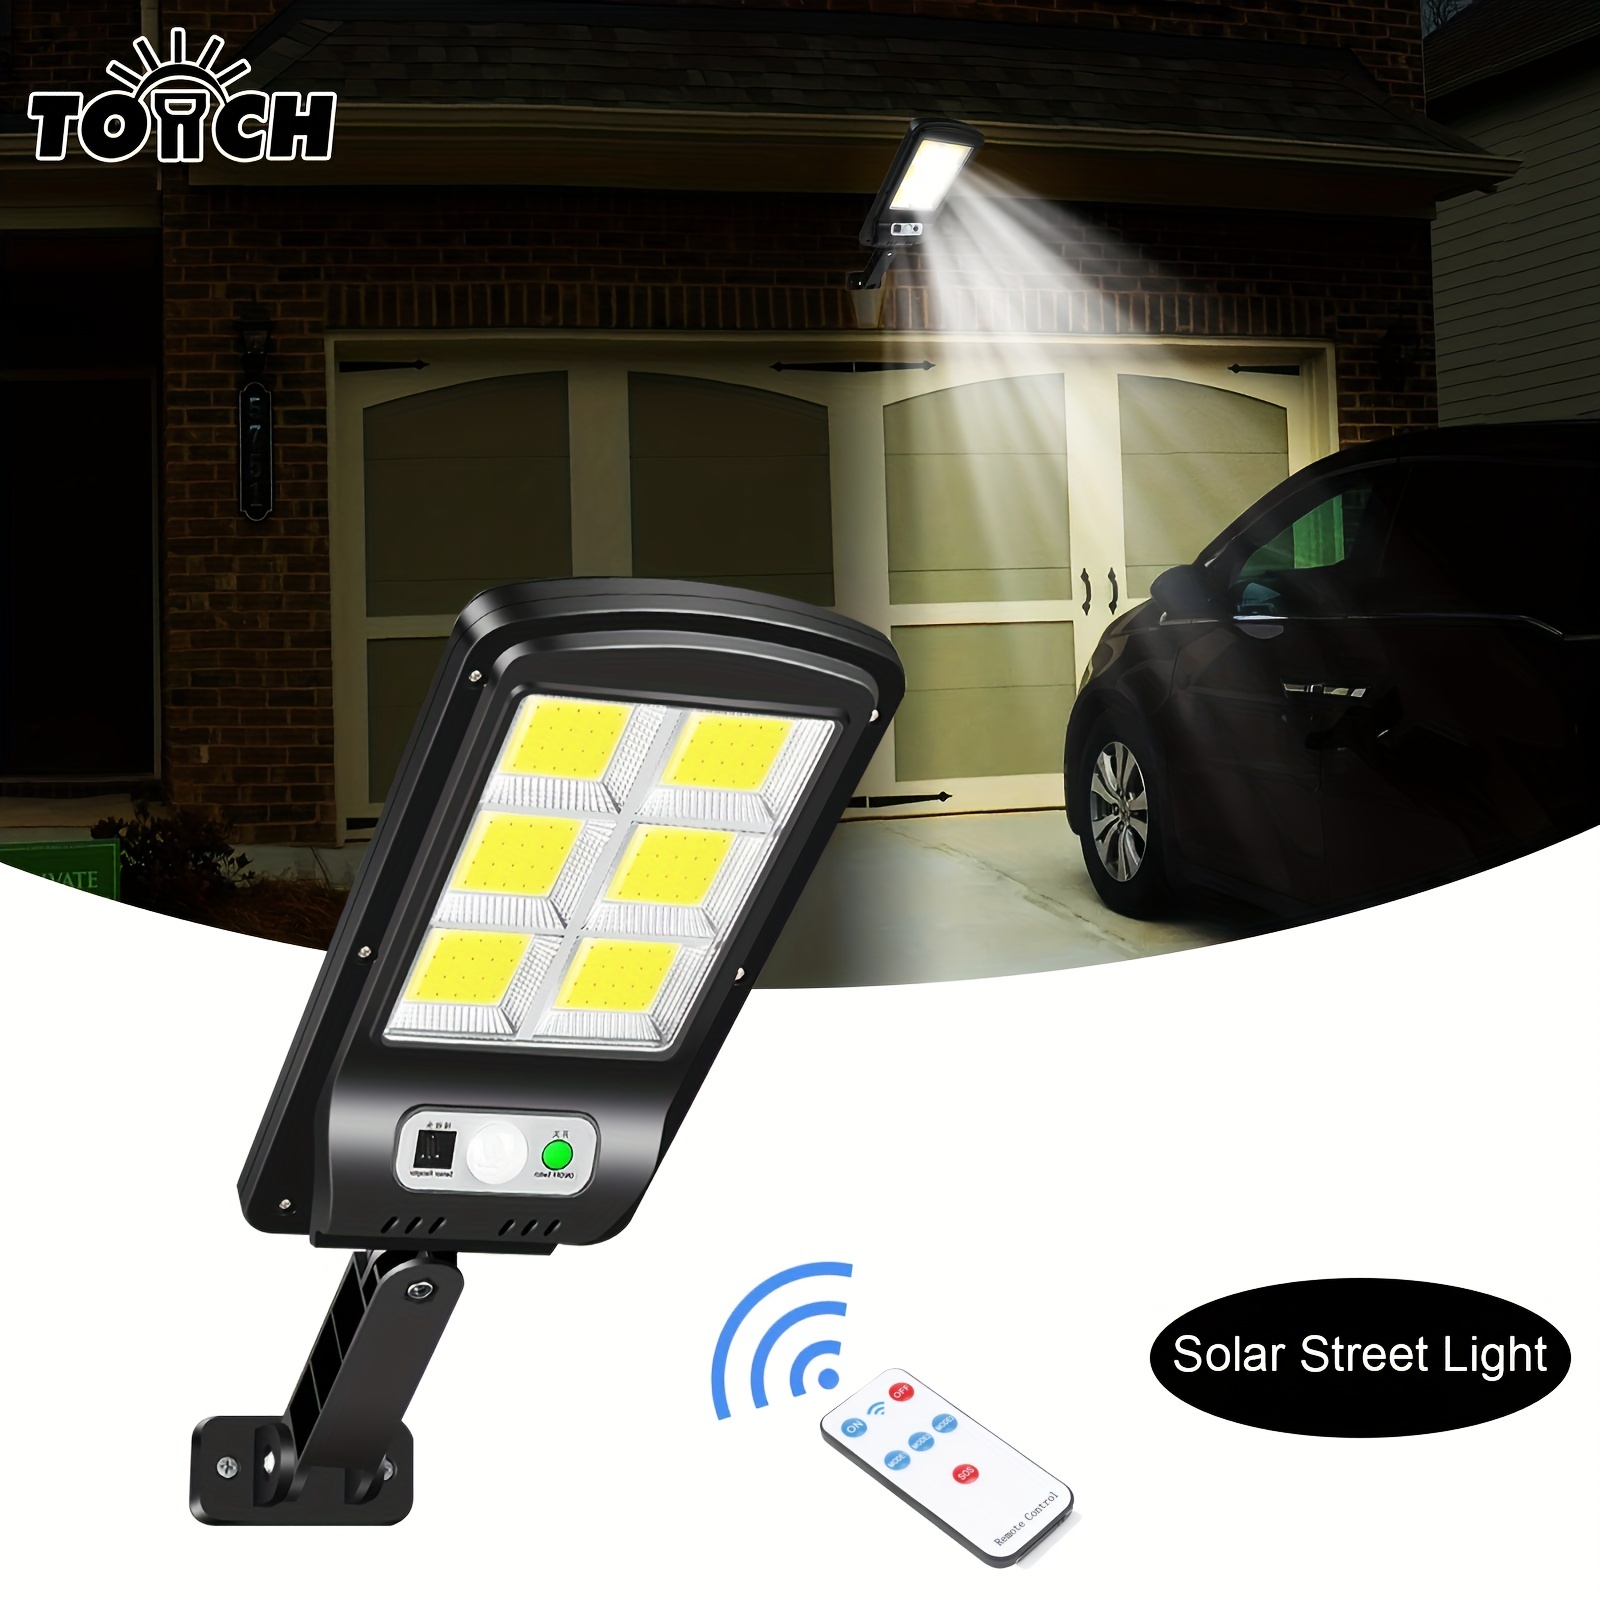 

Solar Street Lights Outdoor With Motion Sensor - Waterproof Led Security Wall Light For Porch And Garden - 3 Lighting Modes And Remote Control Included